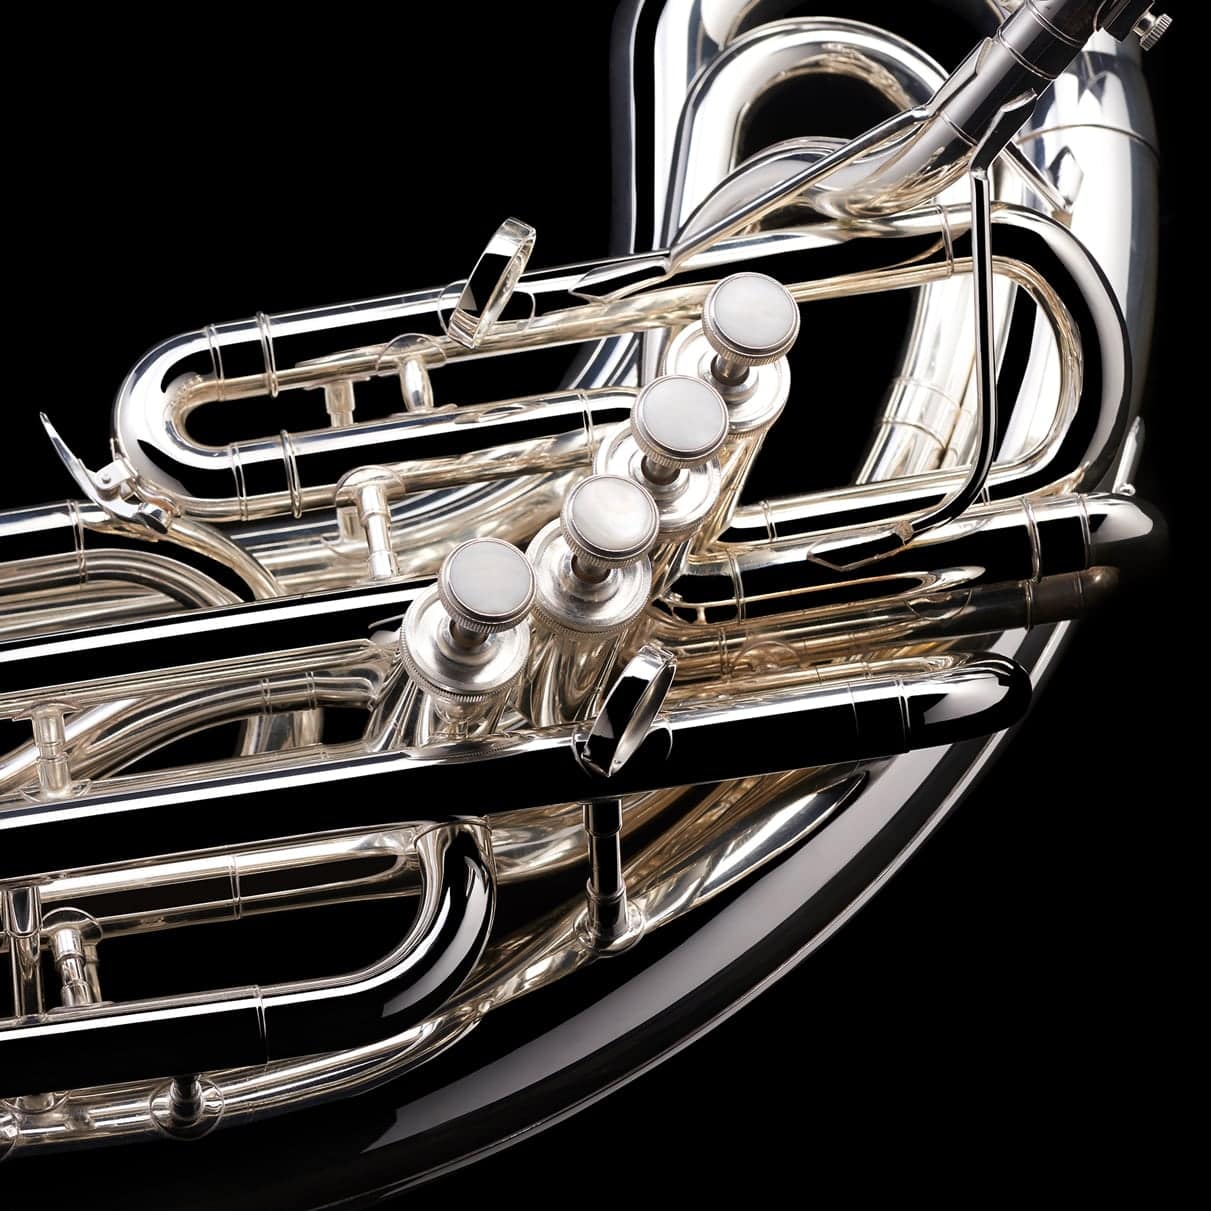 A close up image of the piston valves on a Eb Sousaphone (4-valve) from Wessex Tubas in silver